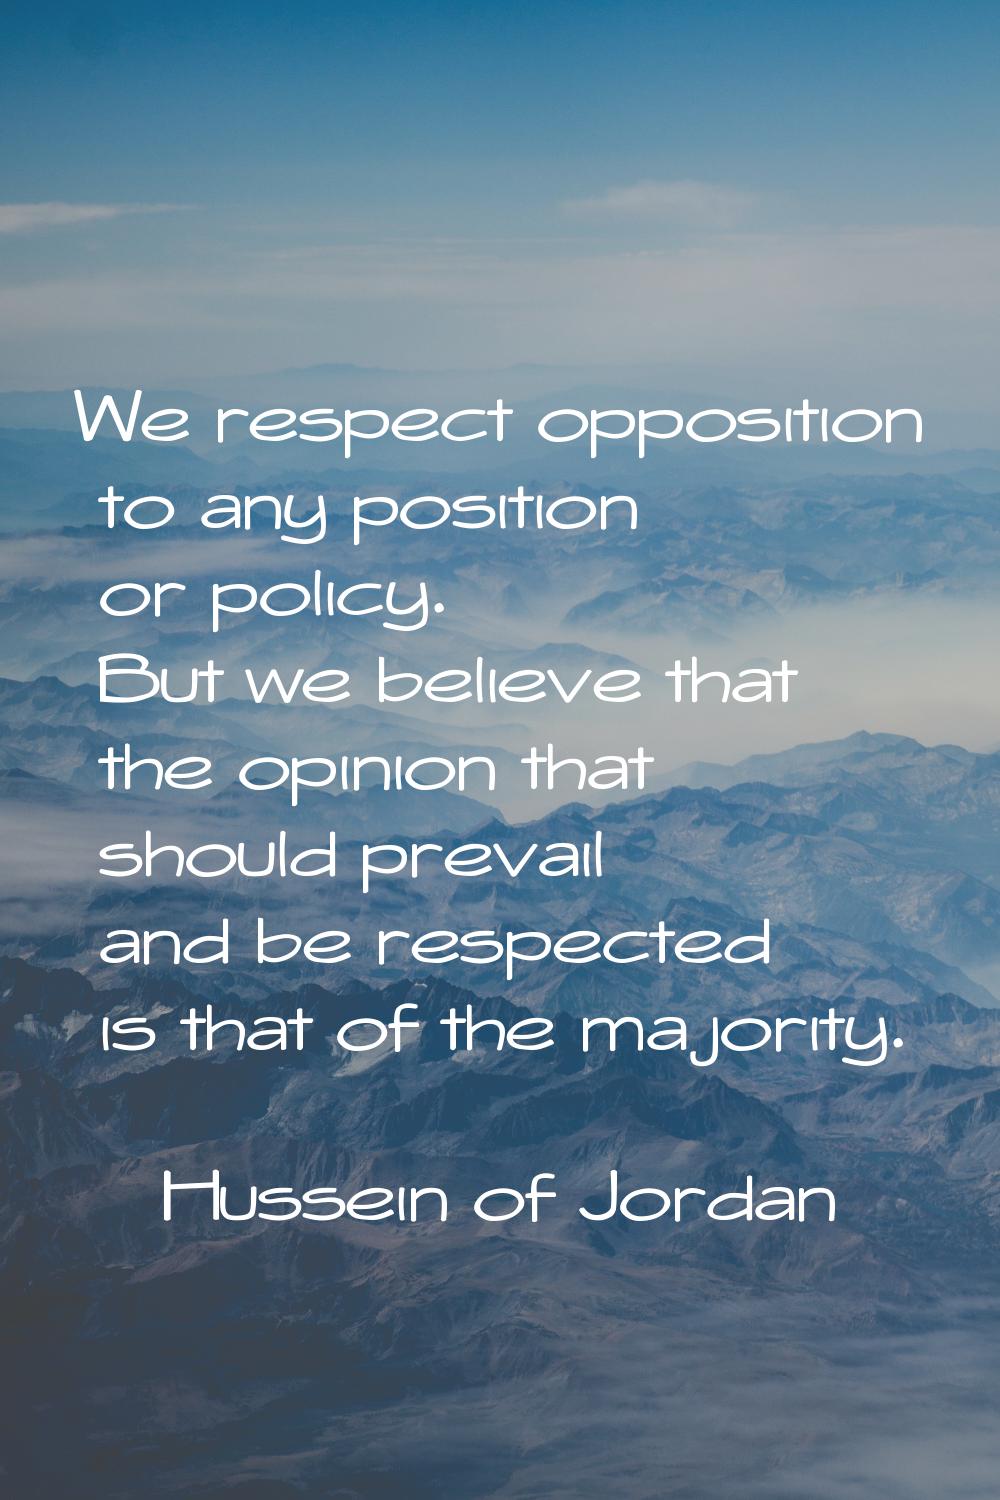 We respect opposition to any position or policy. But we believe that the opinion that should prevai